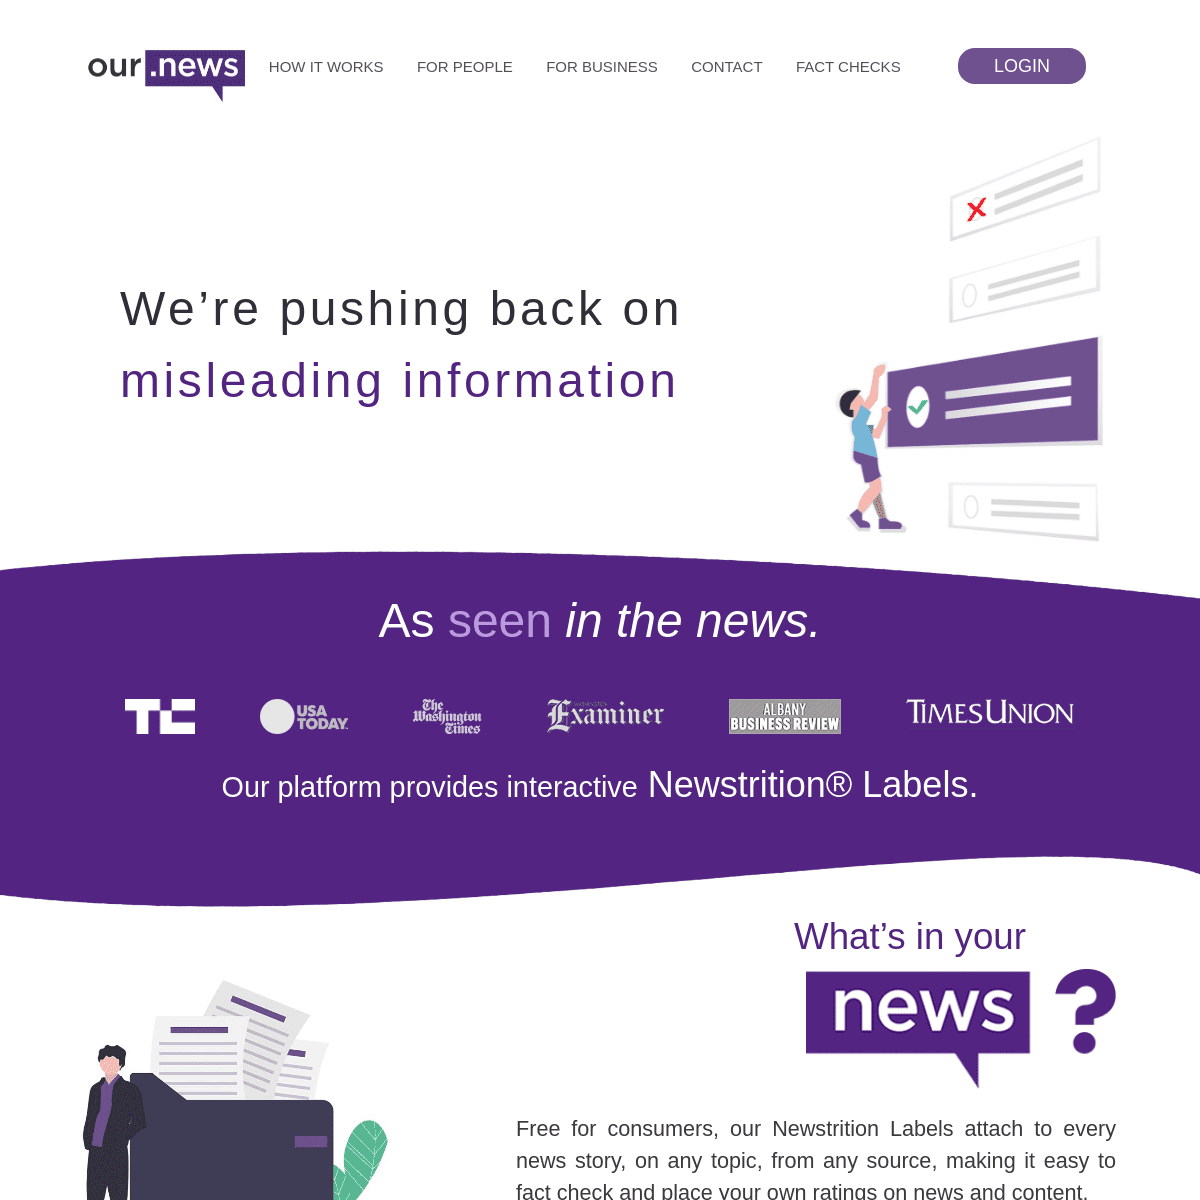 A complete backup of https://our.news